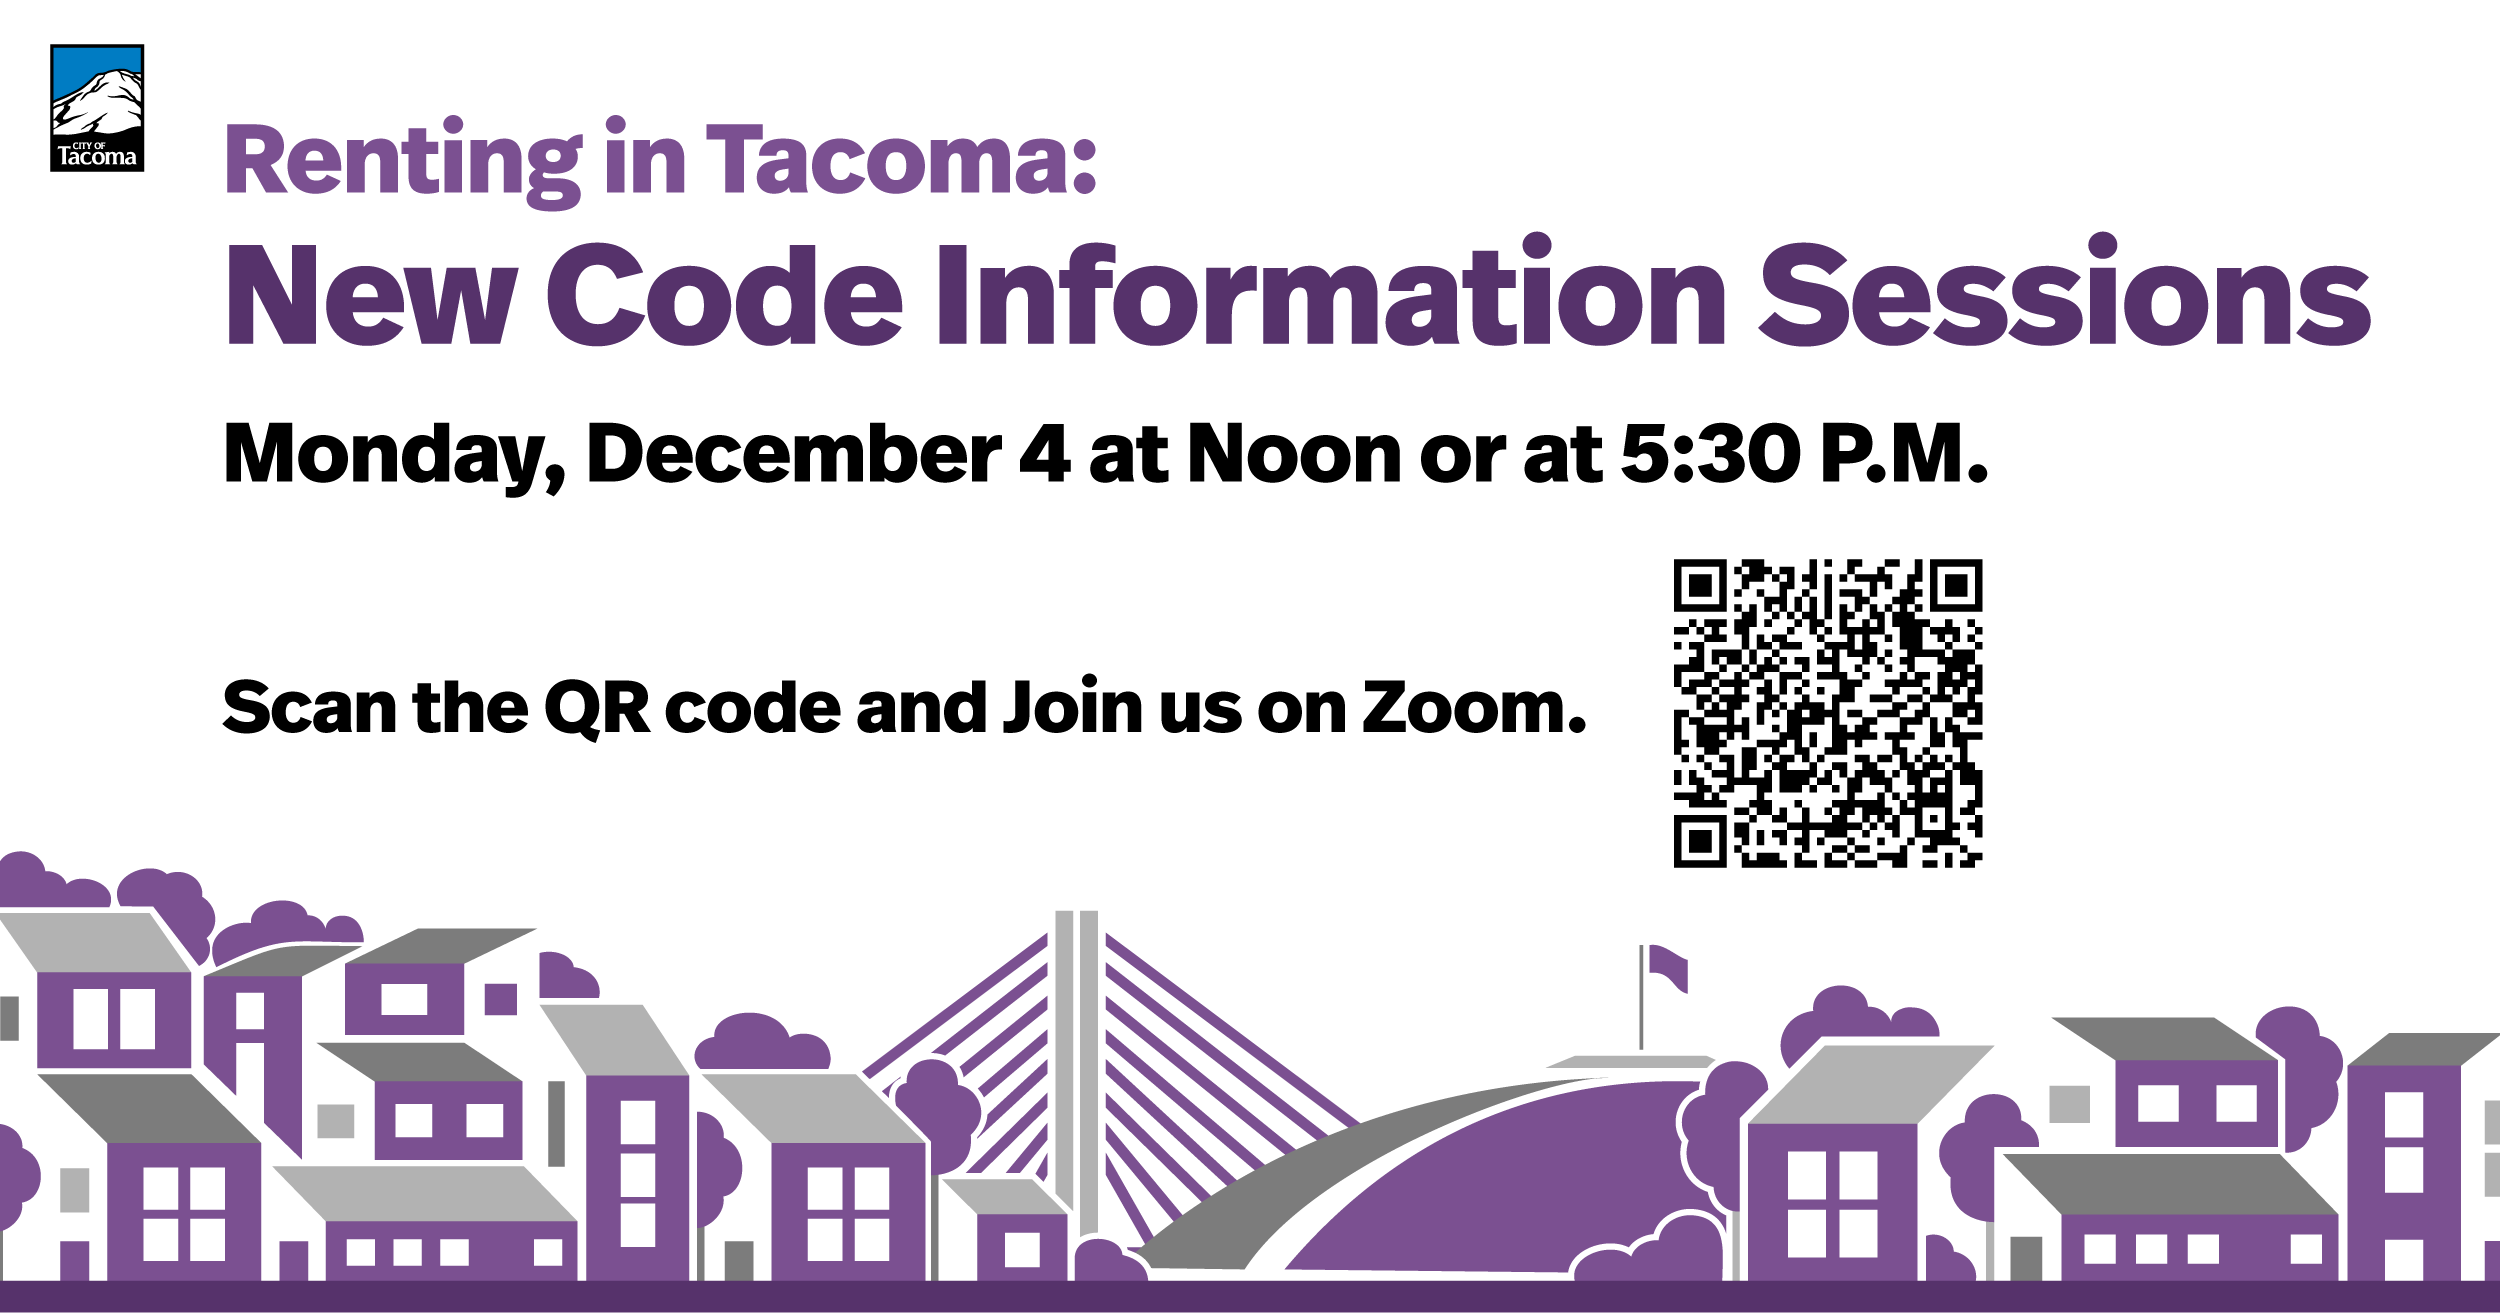 December 4 online sessions on rental code, click to join at noon or 5:30 P.M.